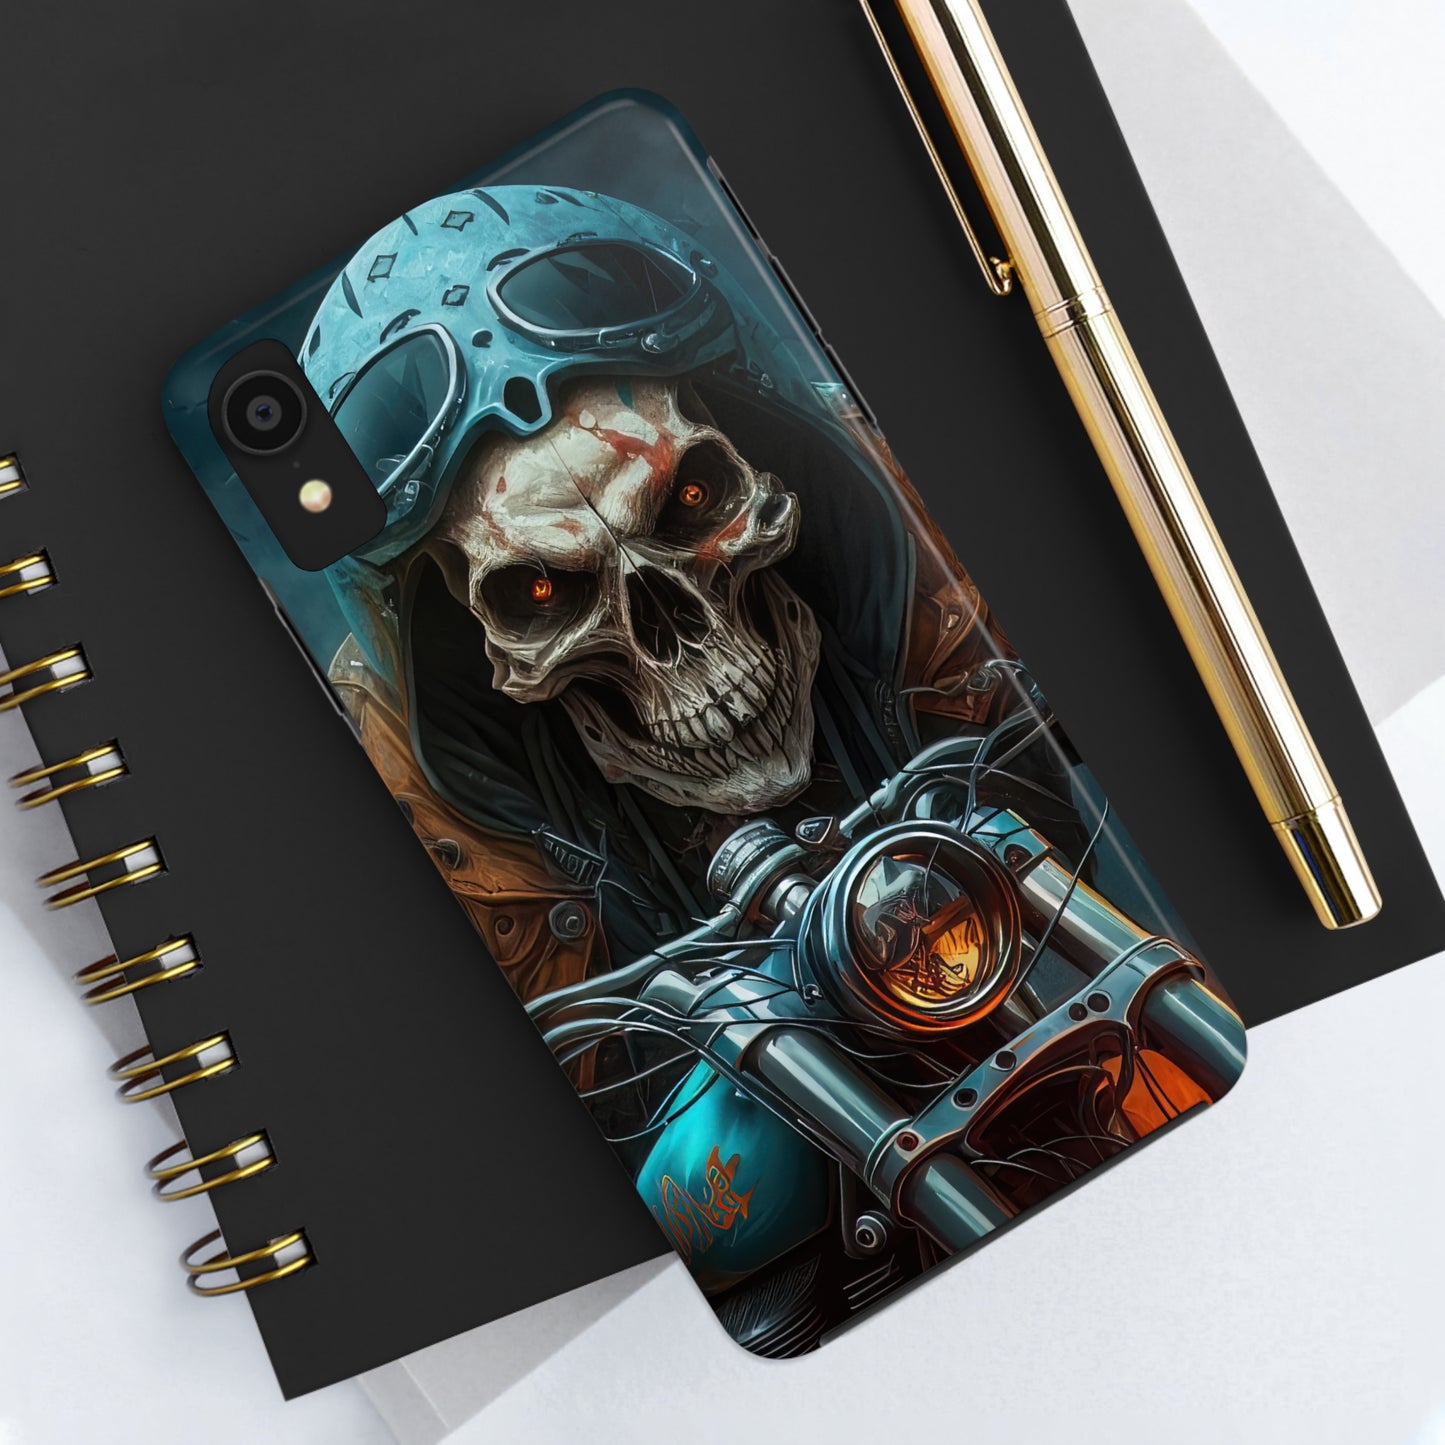 Skull Motorcycle Rider, Ready to Tear Up Road On Beautiful Bike 4 Tough Phone Cases